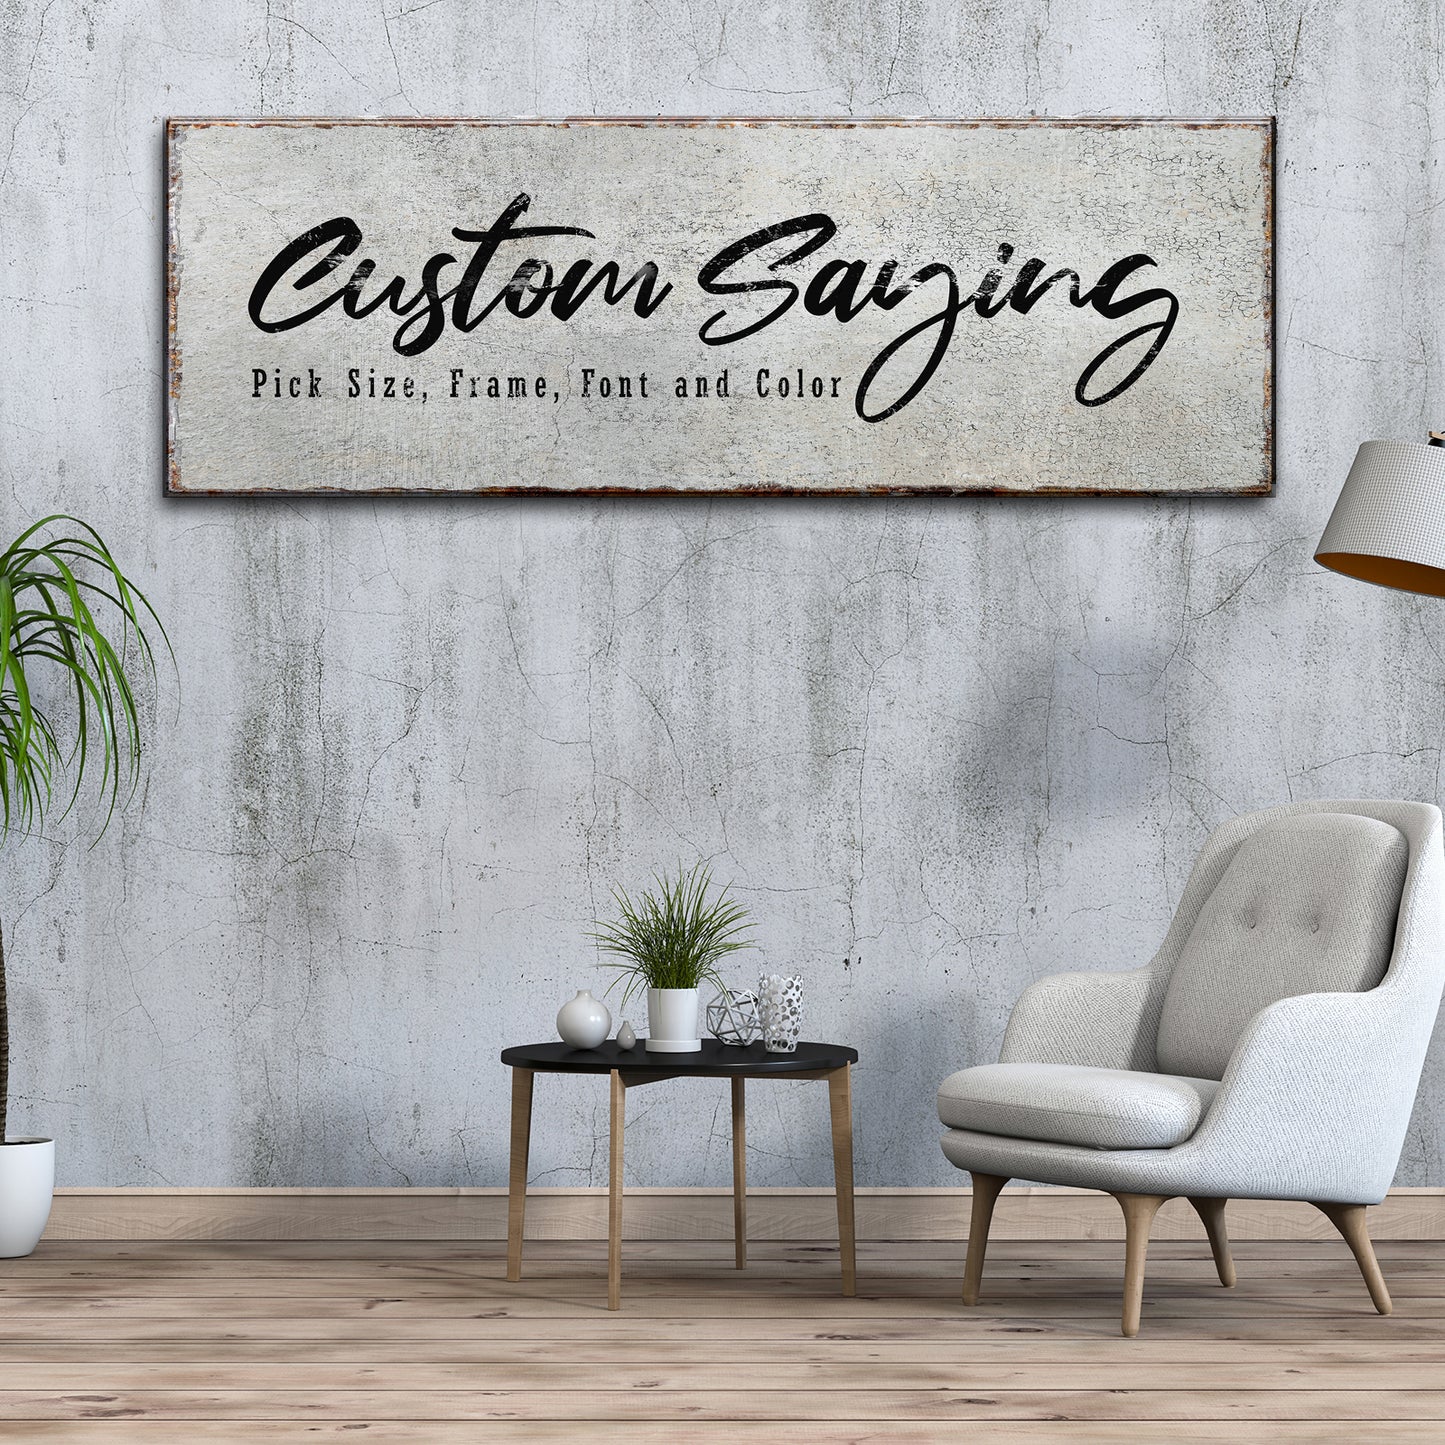 Custom Saying Sign - Image by Tailored Canvases